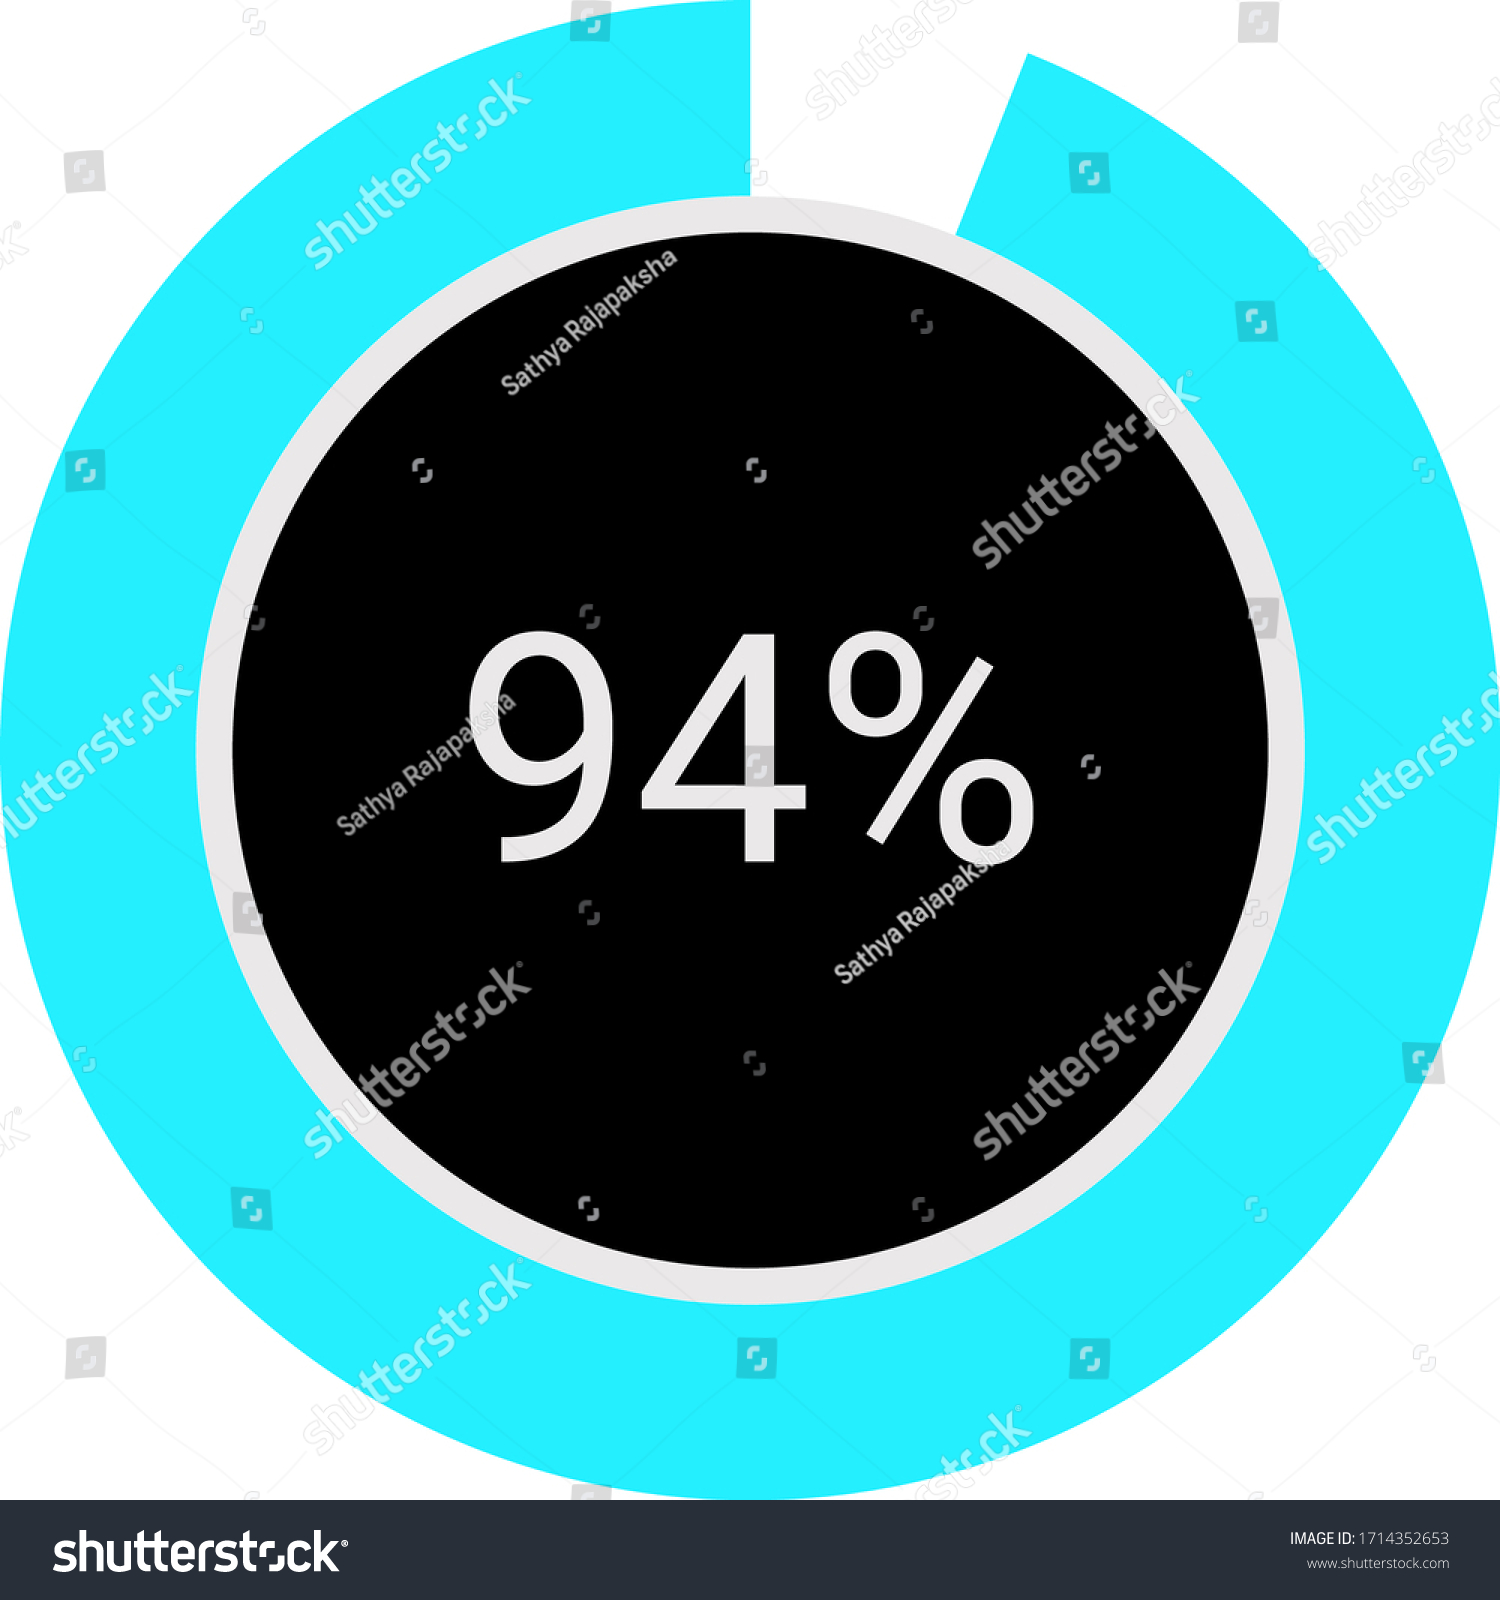 SVG of circle percentage diagrams meter ready-to-use for web design, user interface UI or infographic - indicator with ash, red & black showing 94% svg